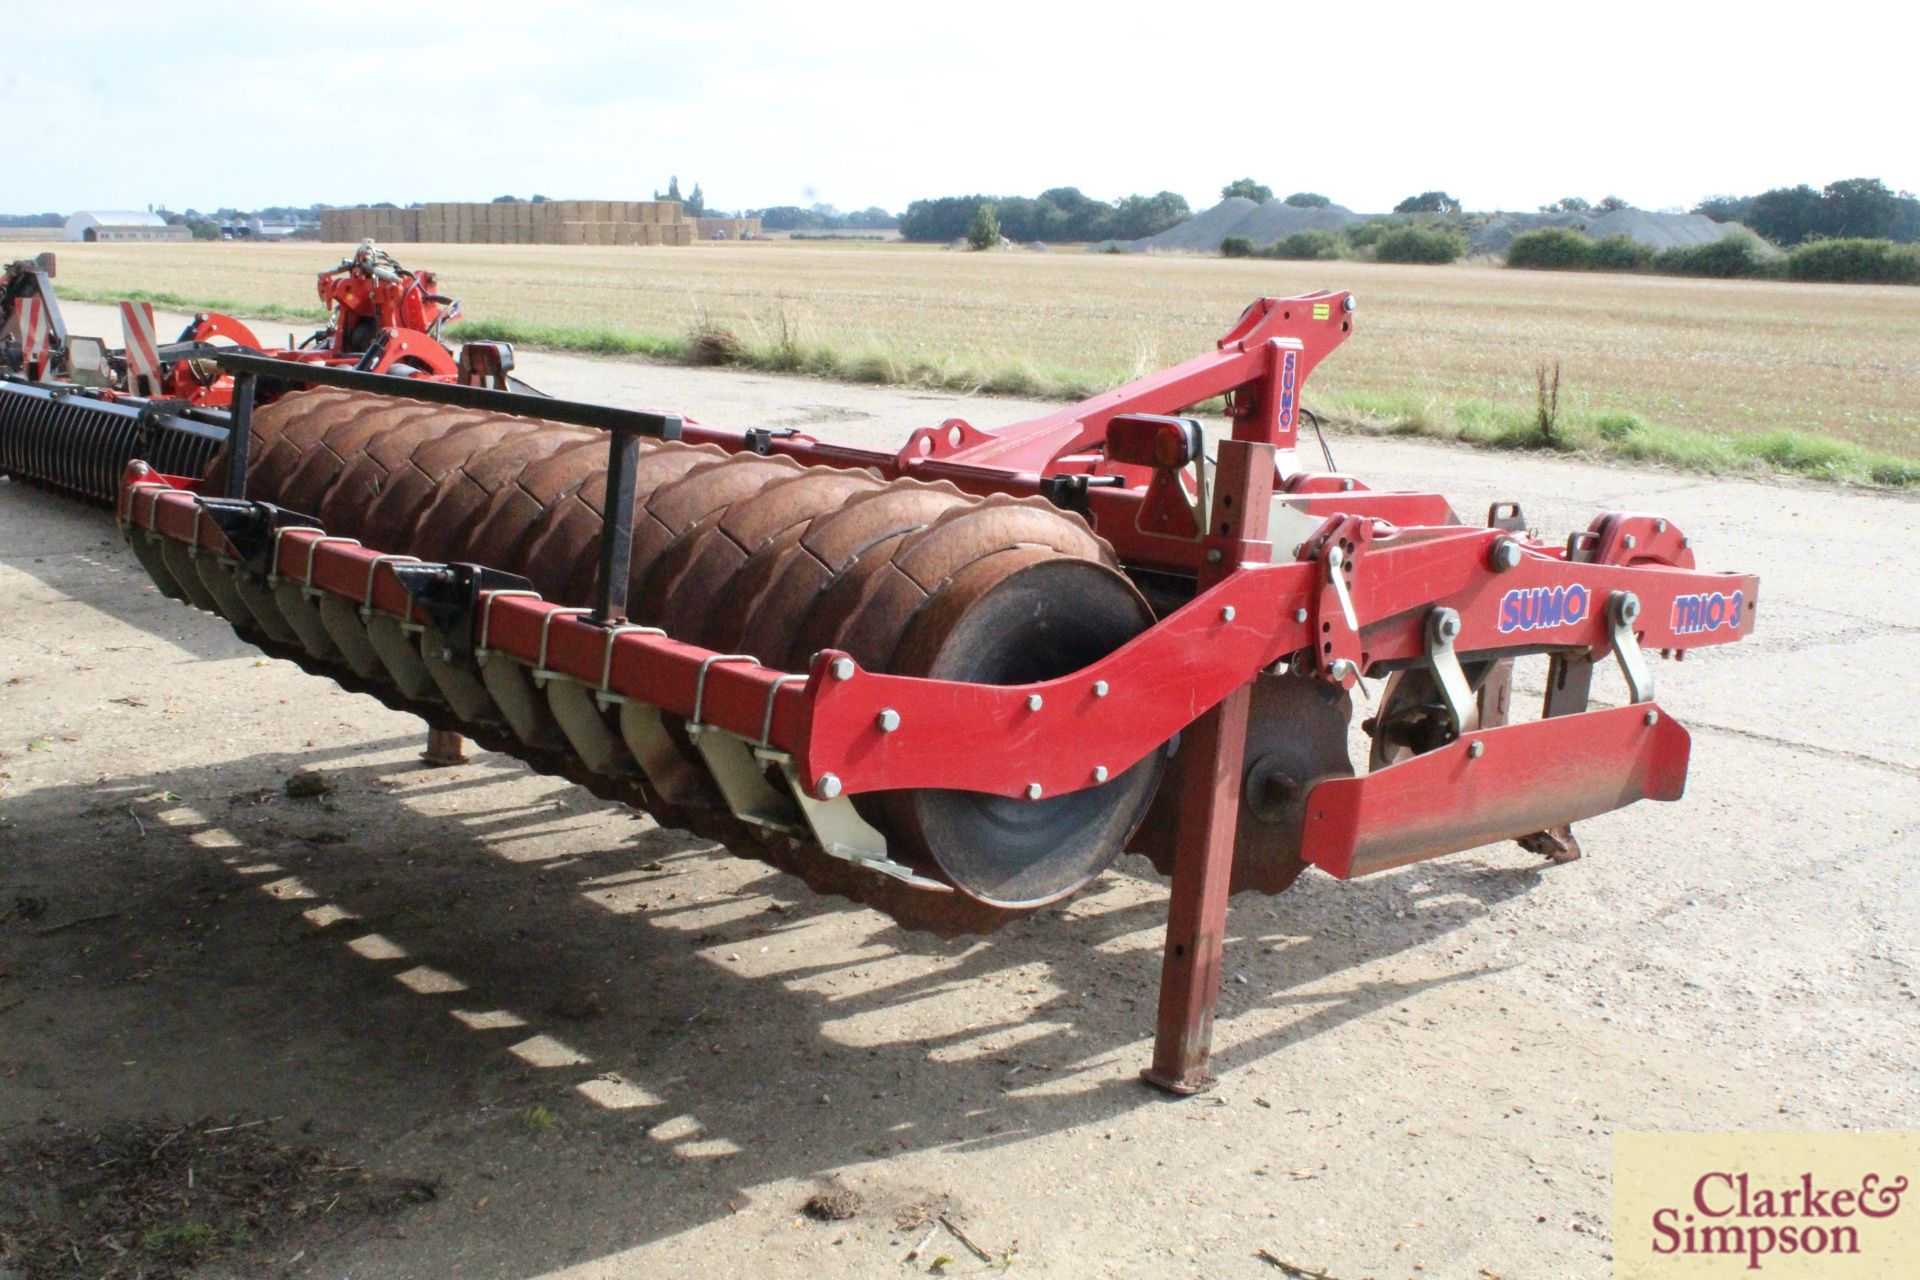 Sumo Trio 3 3m mounted cultivator 2012. Serial number 11626. With six Metcalfe low disturbance legs, - Image 4 of 21